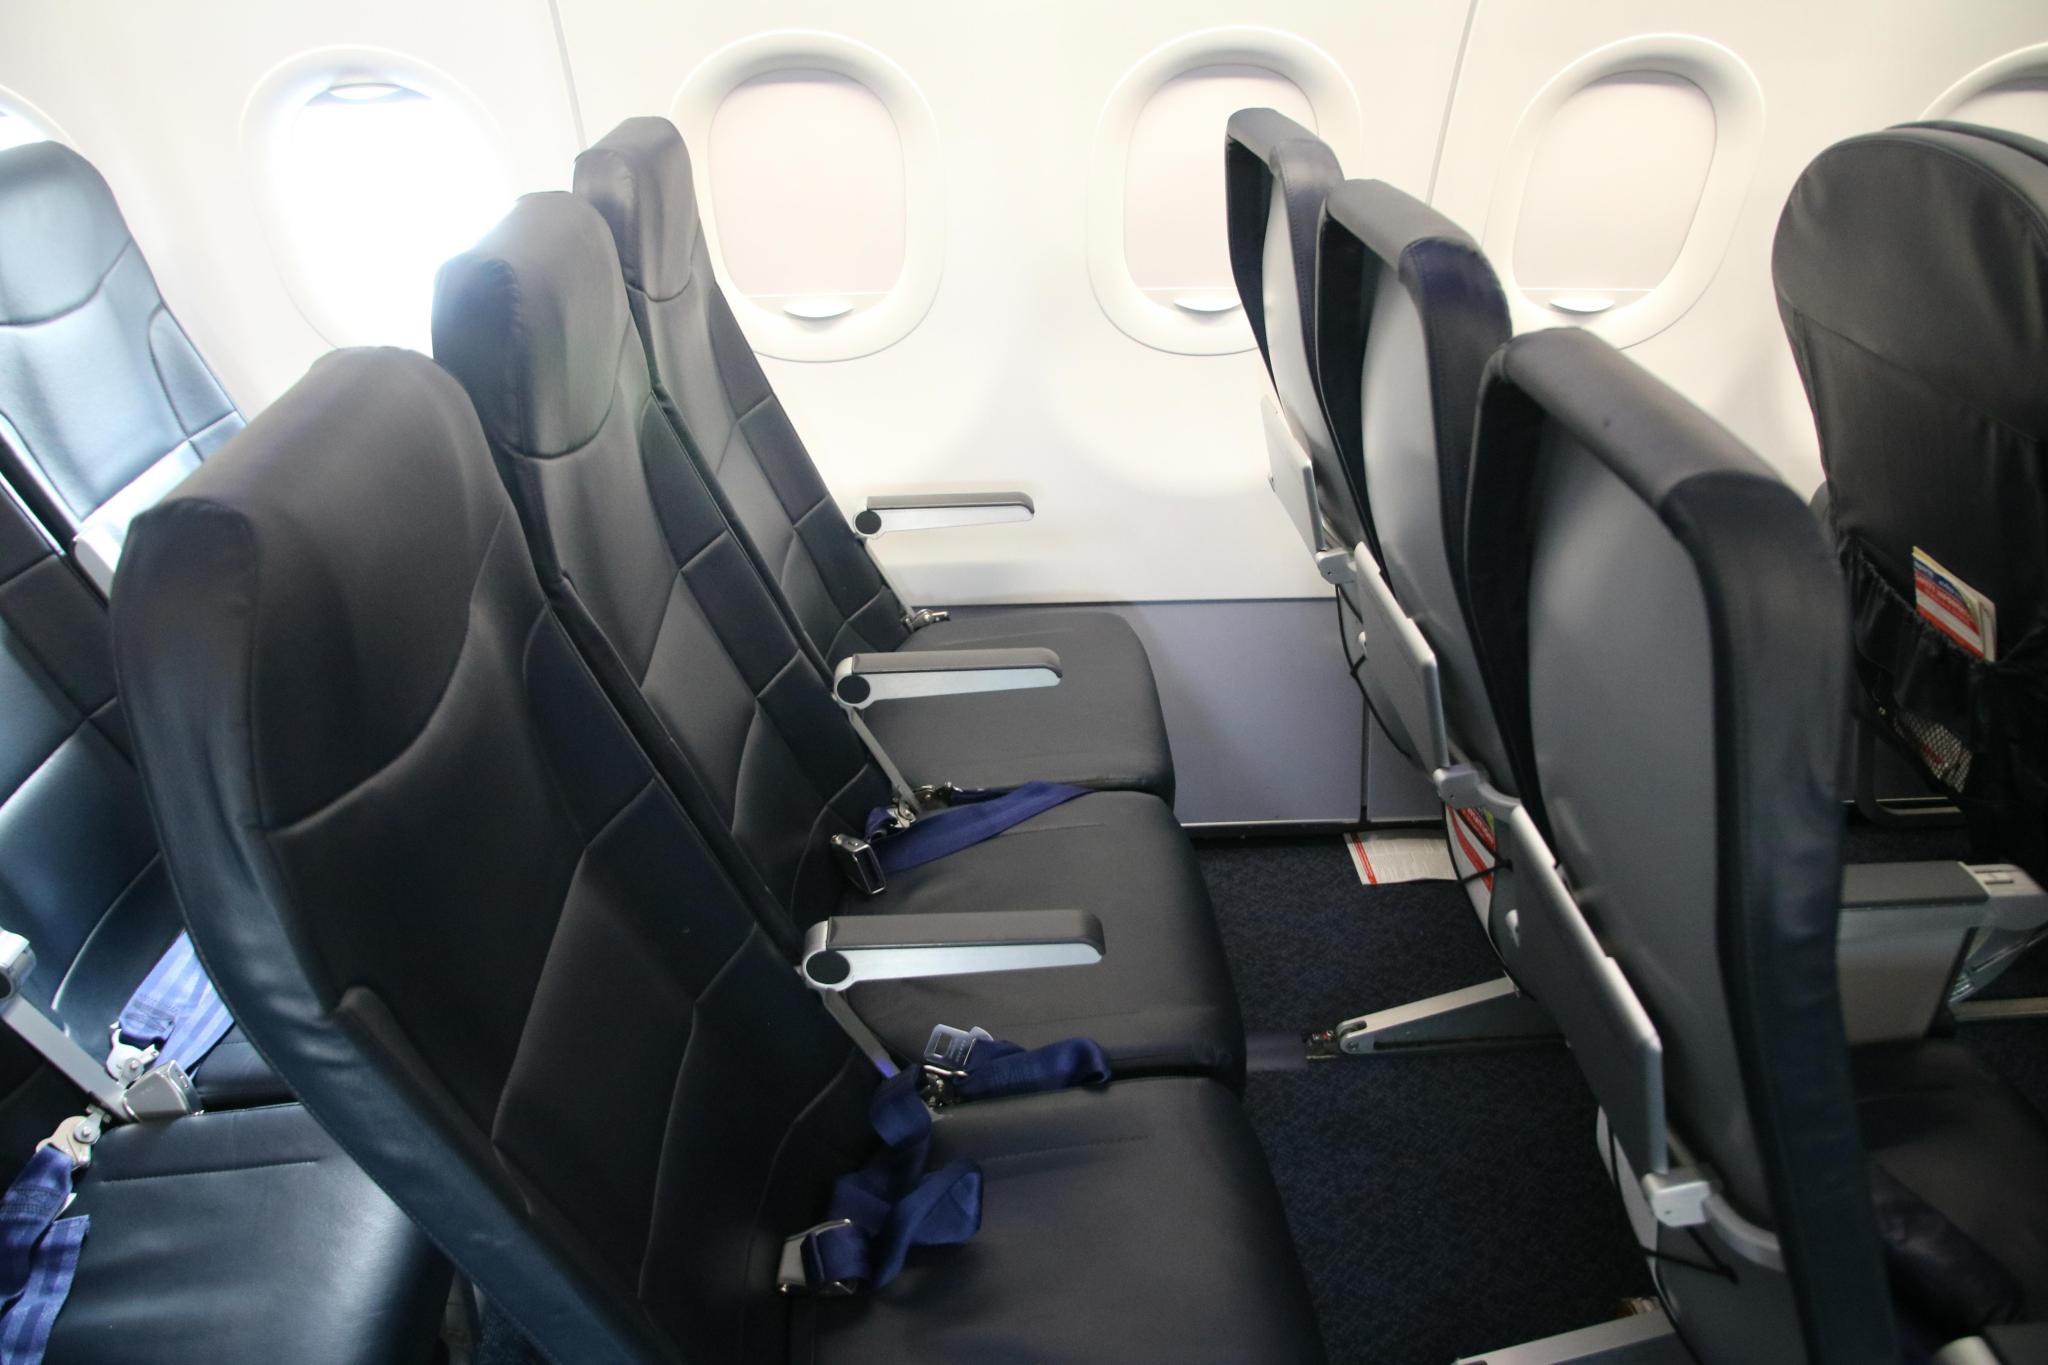 Spirit Airlines Airbus A321 200 Economy Class Standard Coach Seats Layout 3 3 Configuration